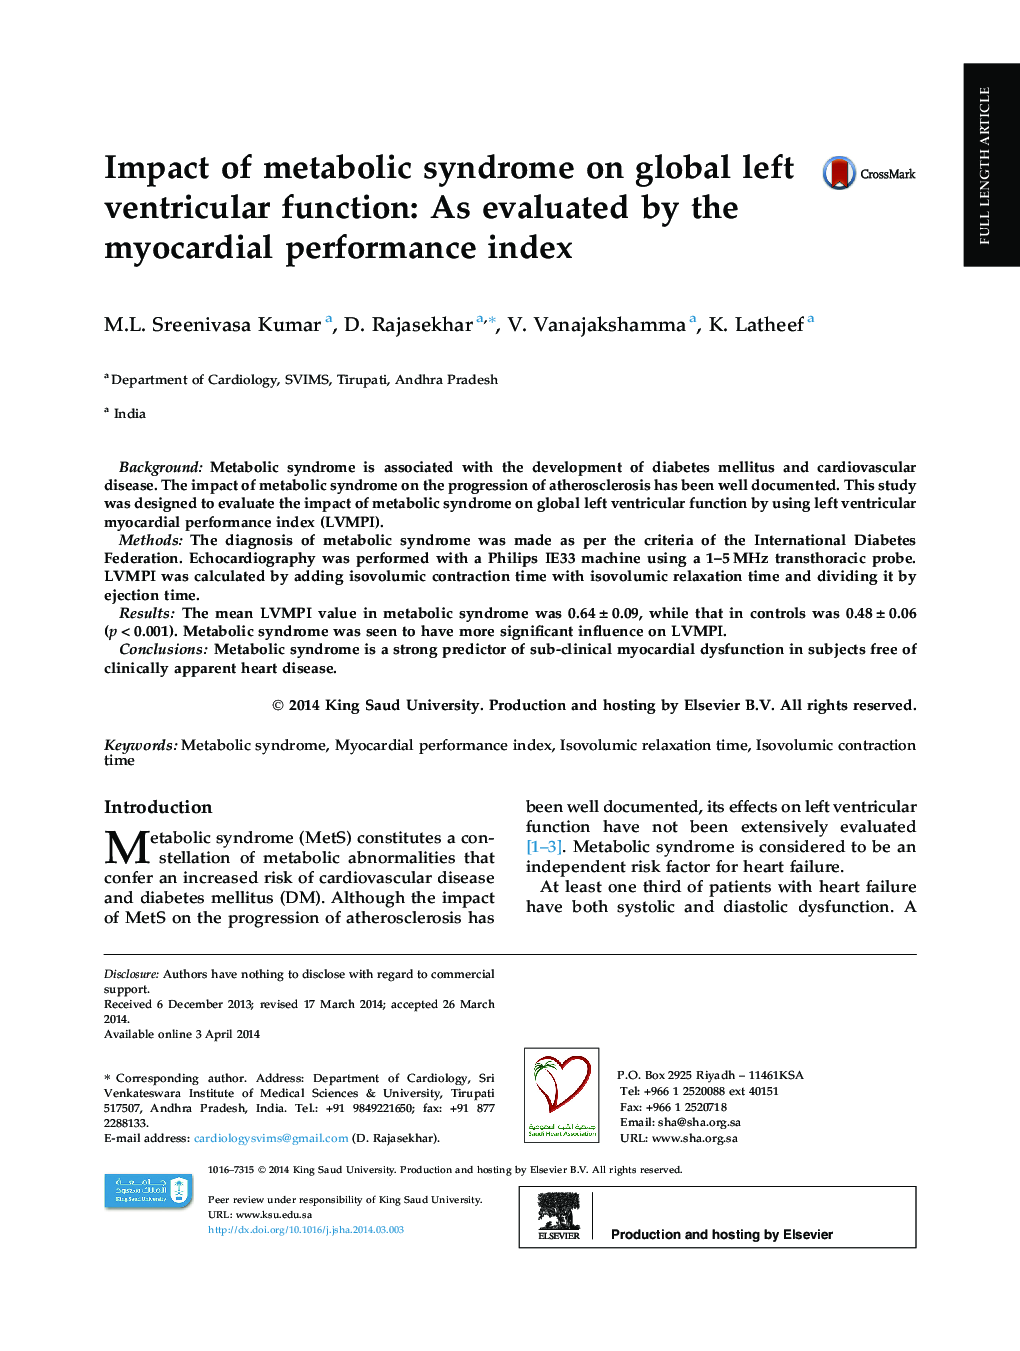 Impact of metabolic syndrome on global left ventricular function: As evaluated by the myocardial performance index 